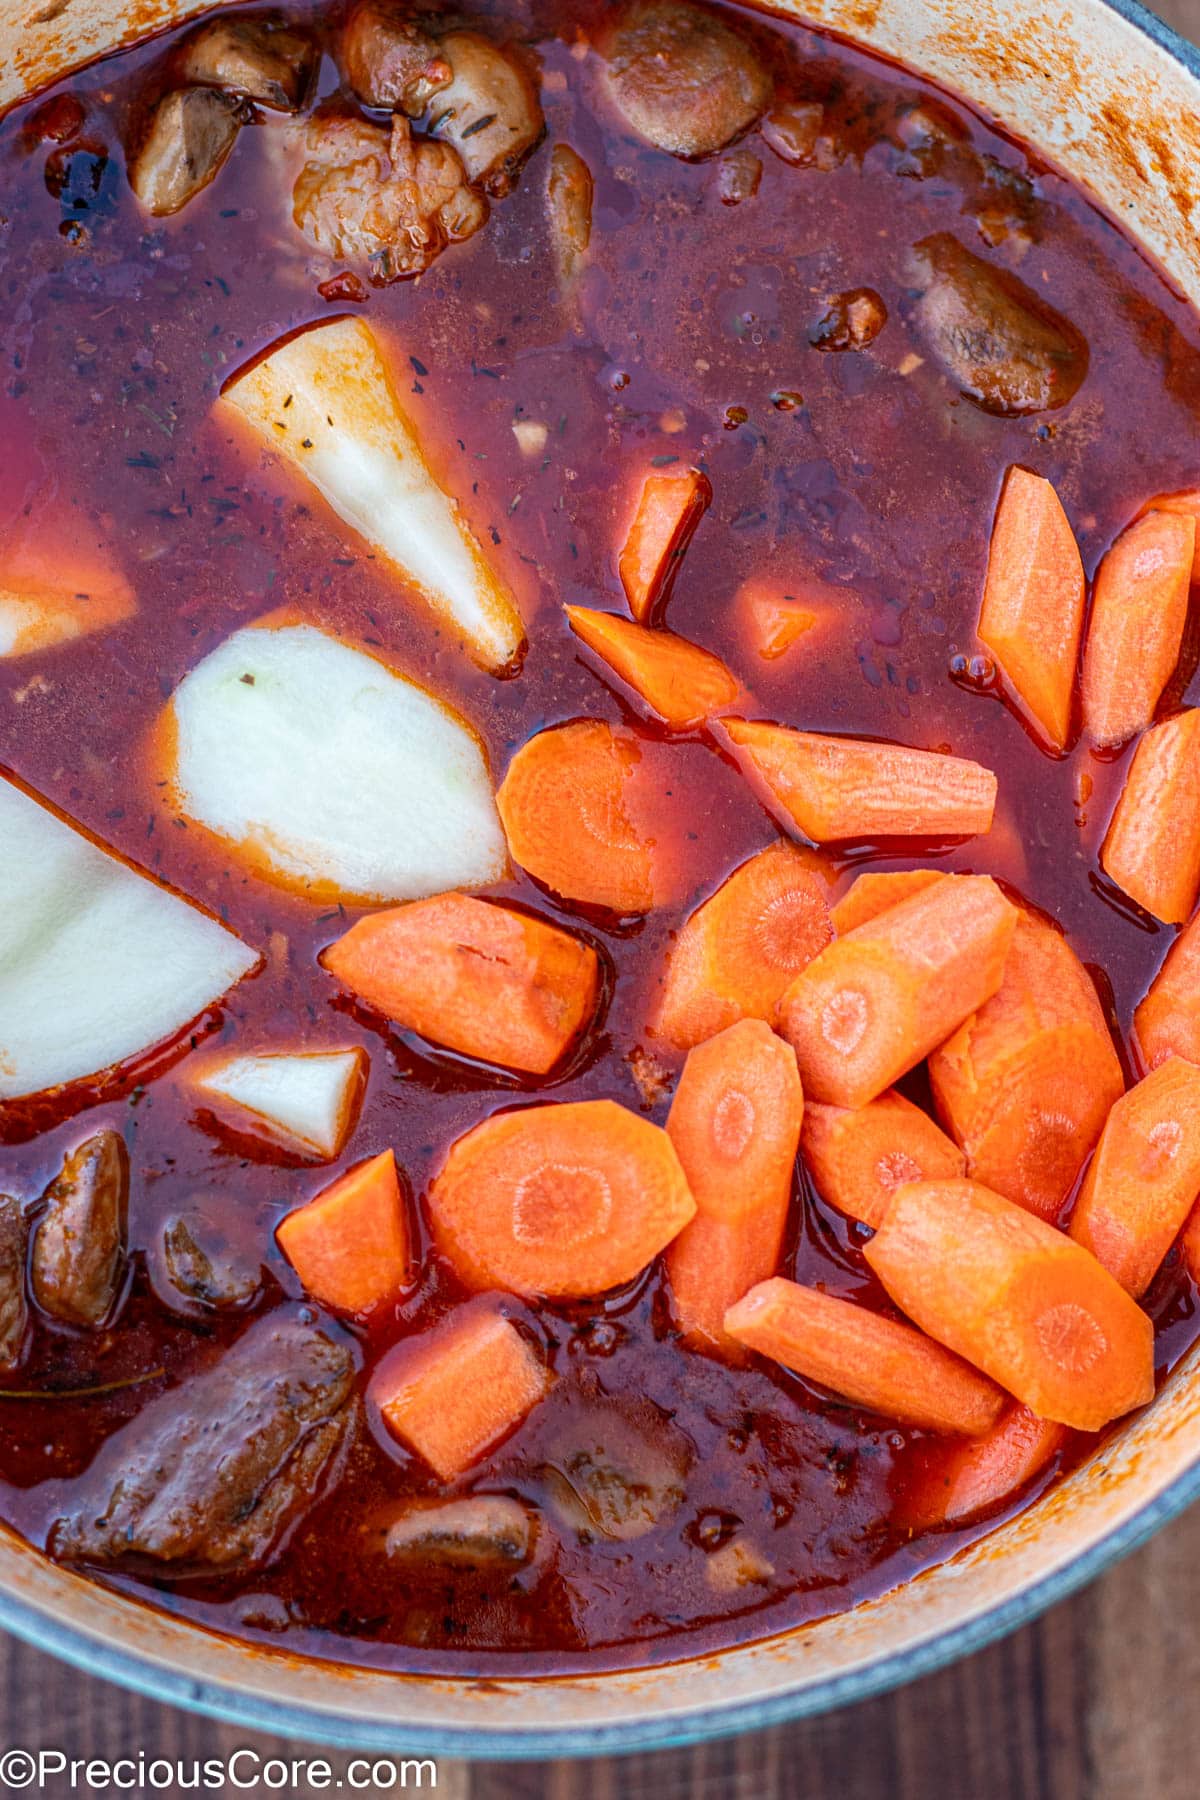 Raw carrots and potatoes added to pot of stew.